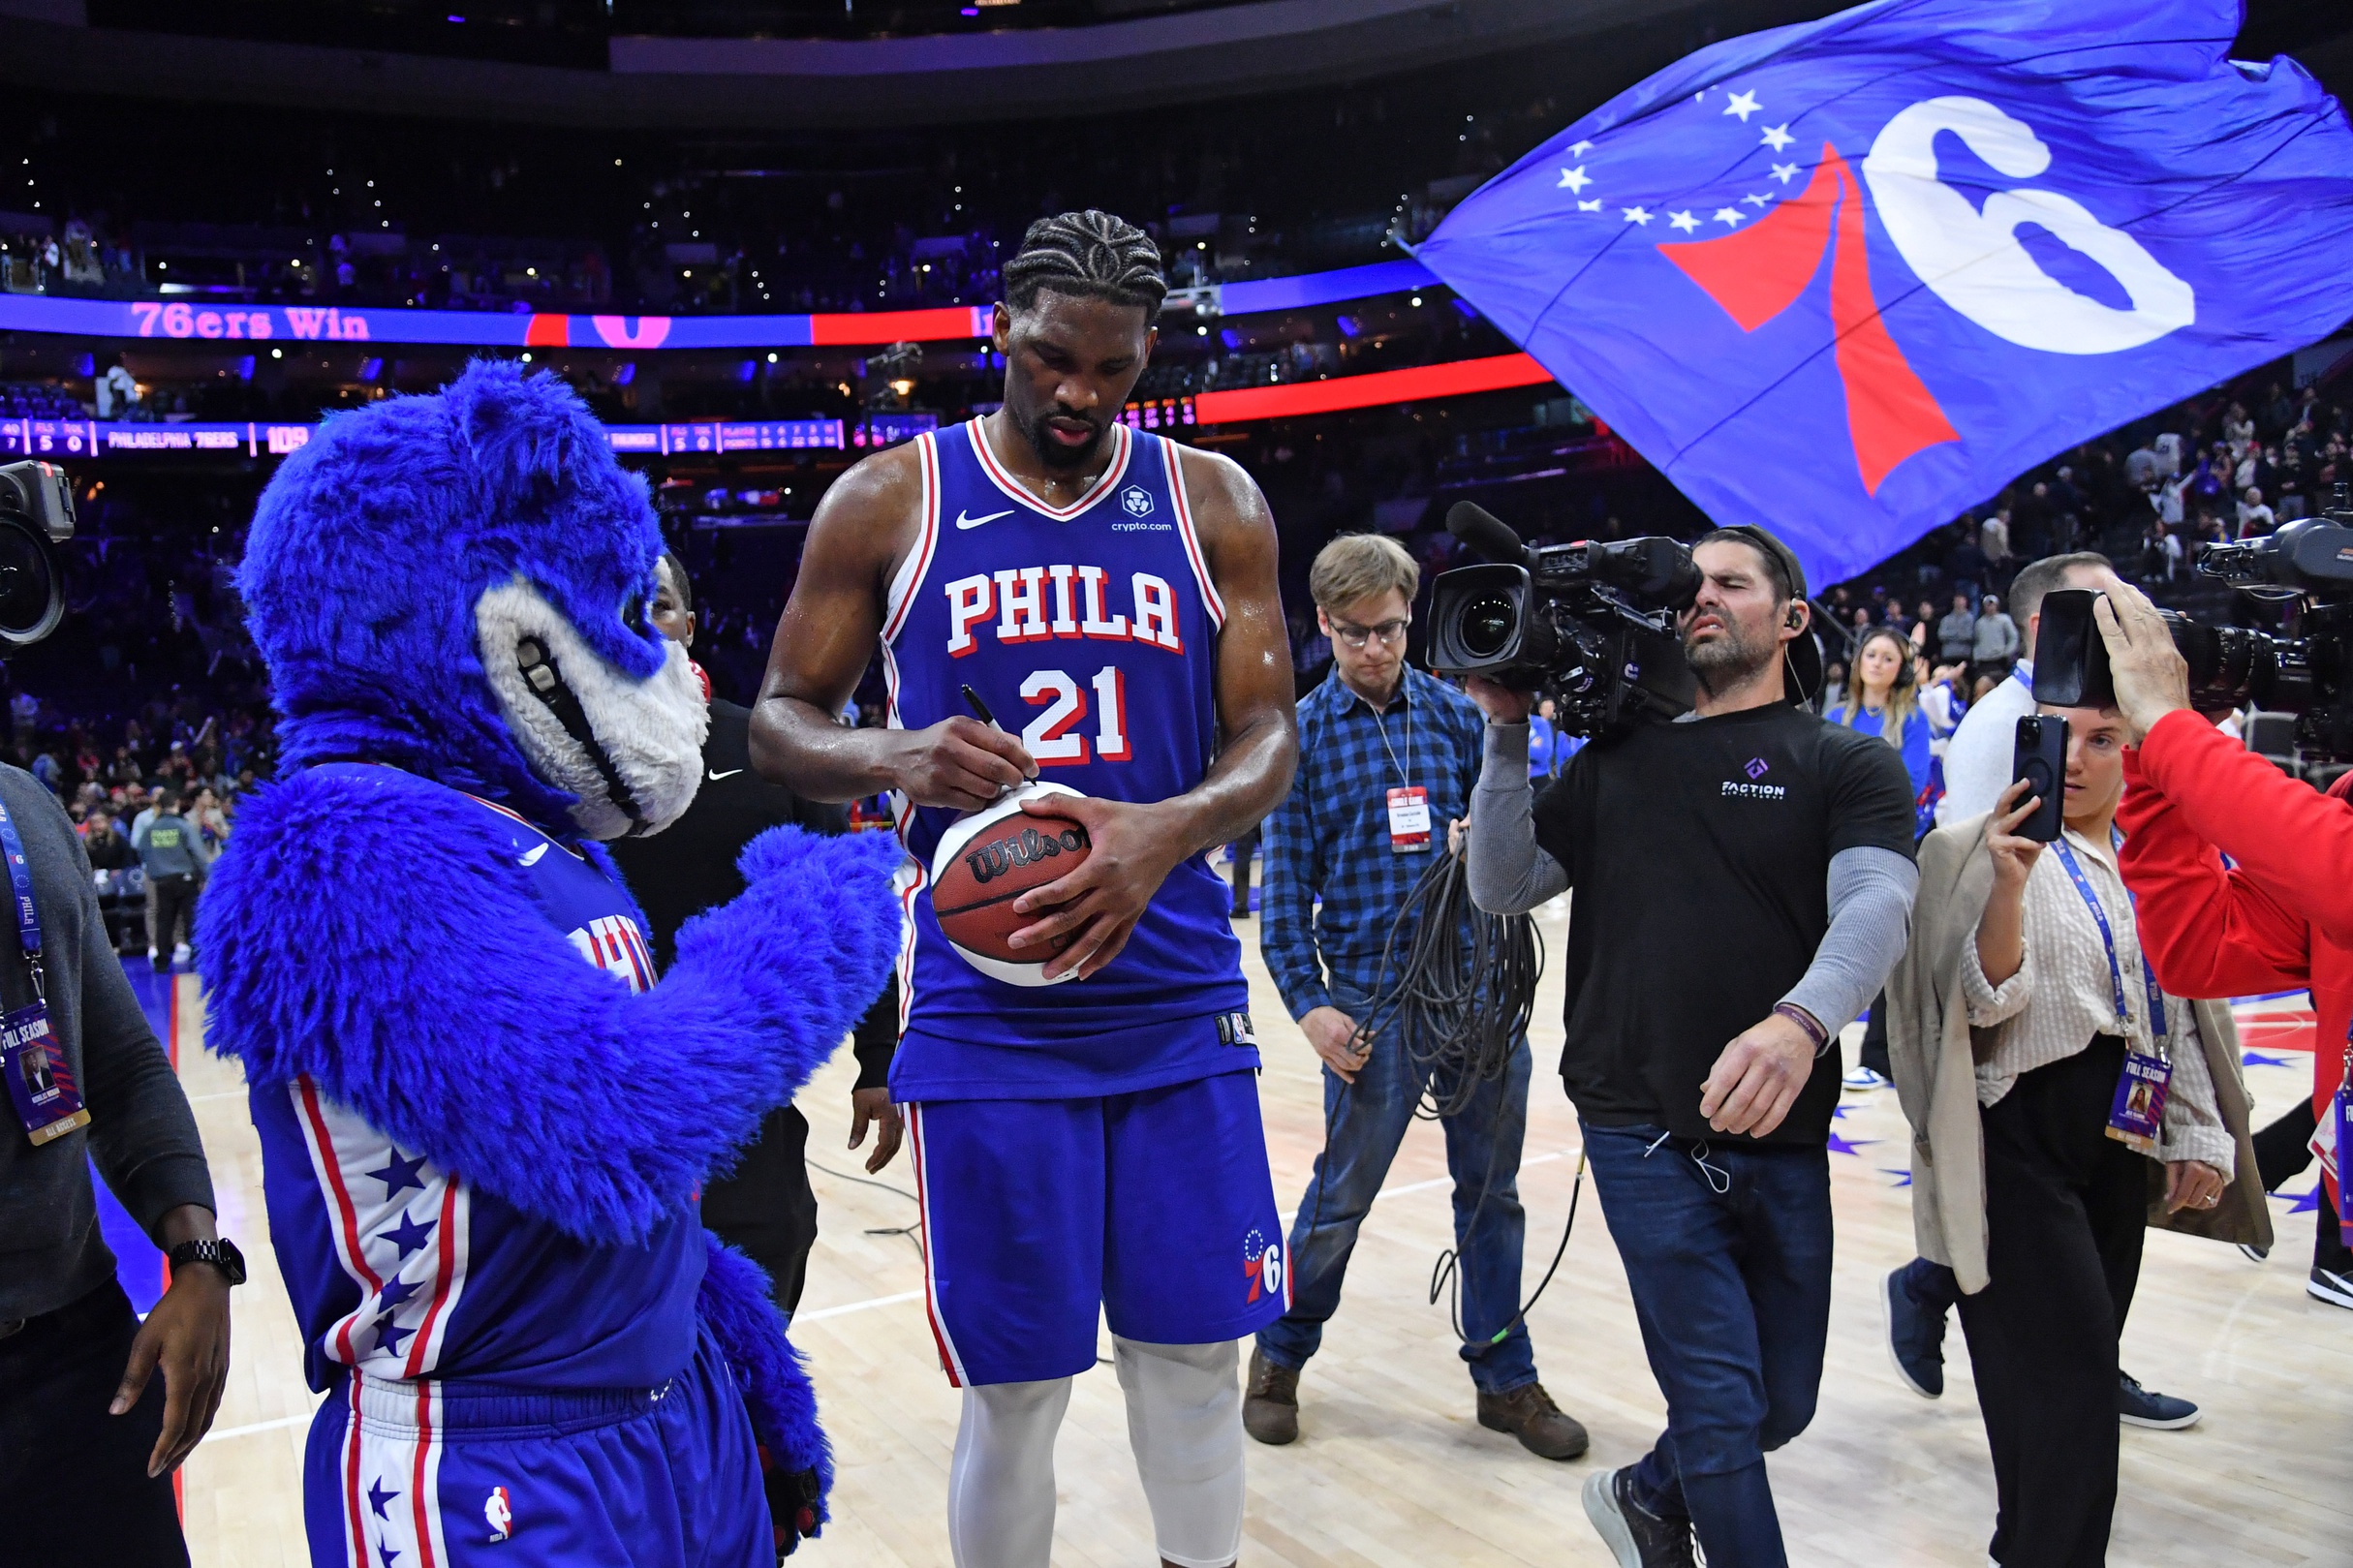 Philadelphia 76ers center Joel Embiid signs autograph after returning from injury